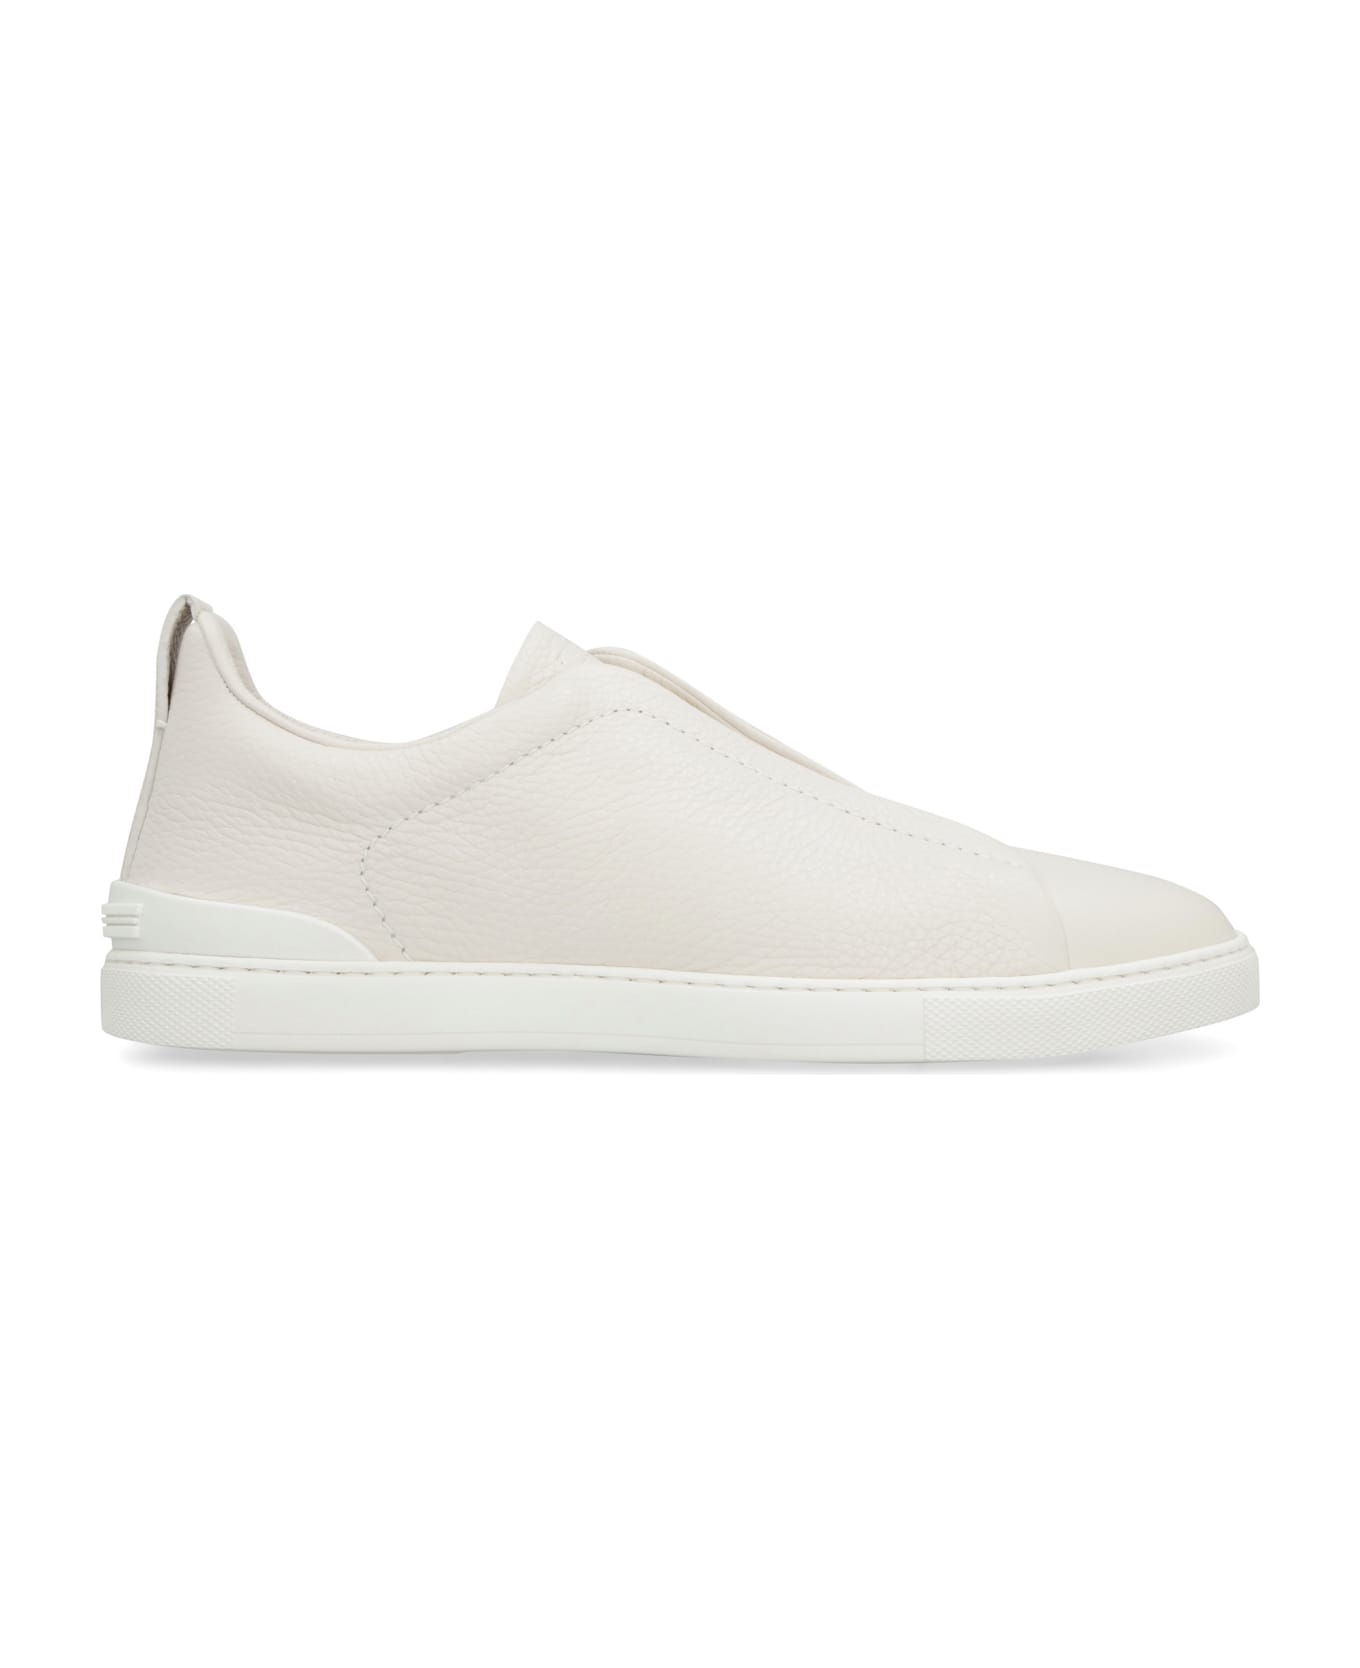 Zegna Triple Stitch Leather Sneakers - Ivory